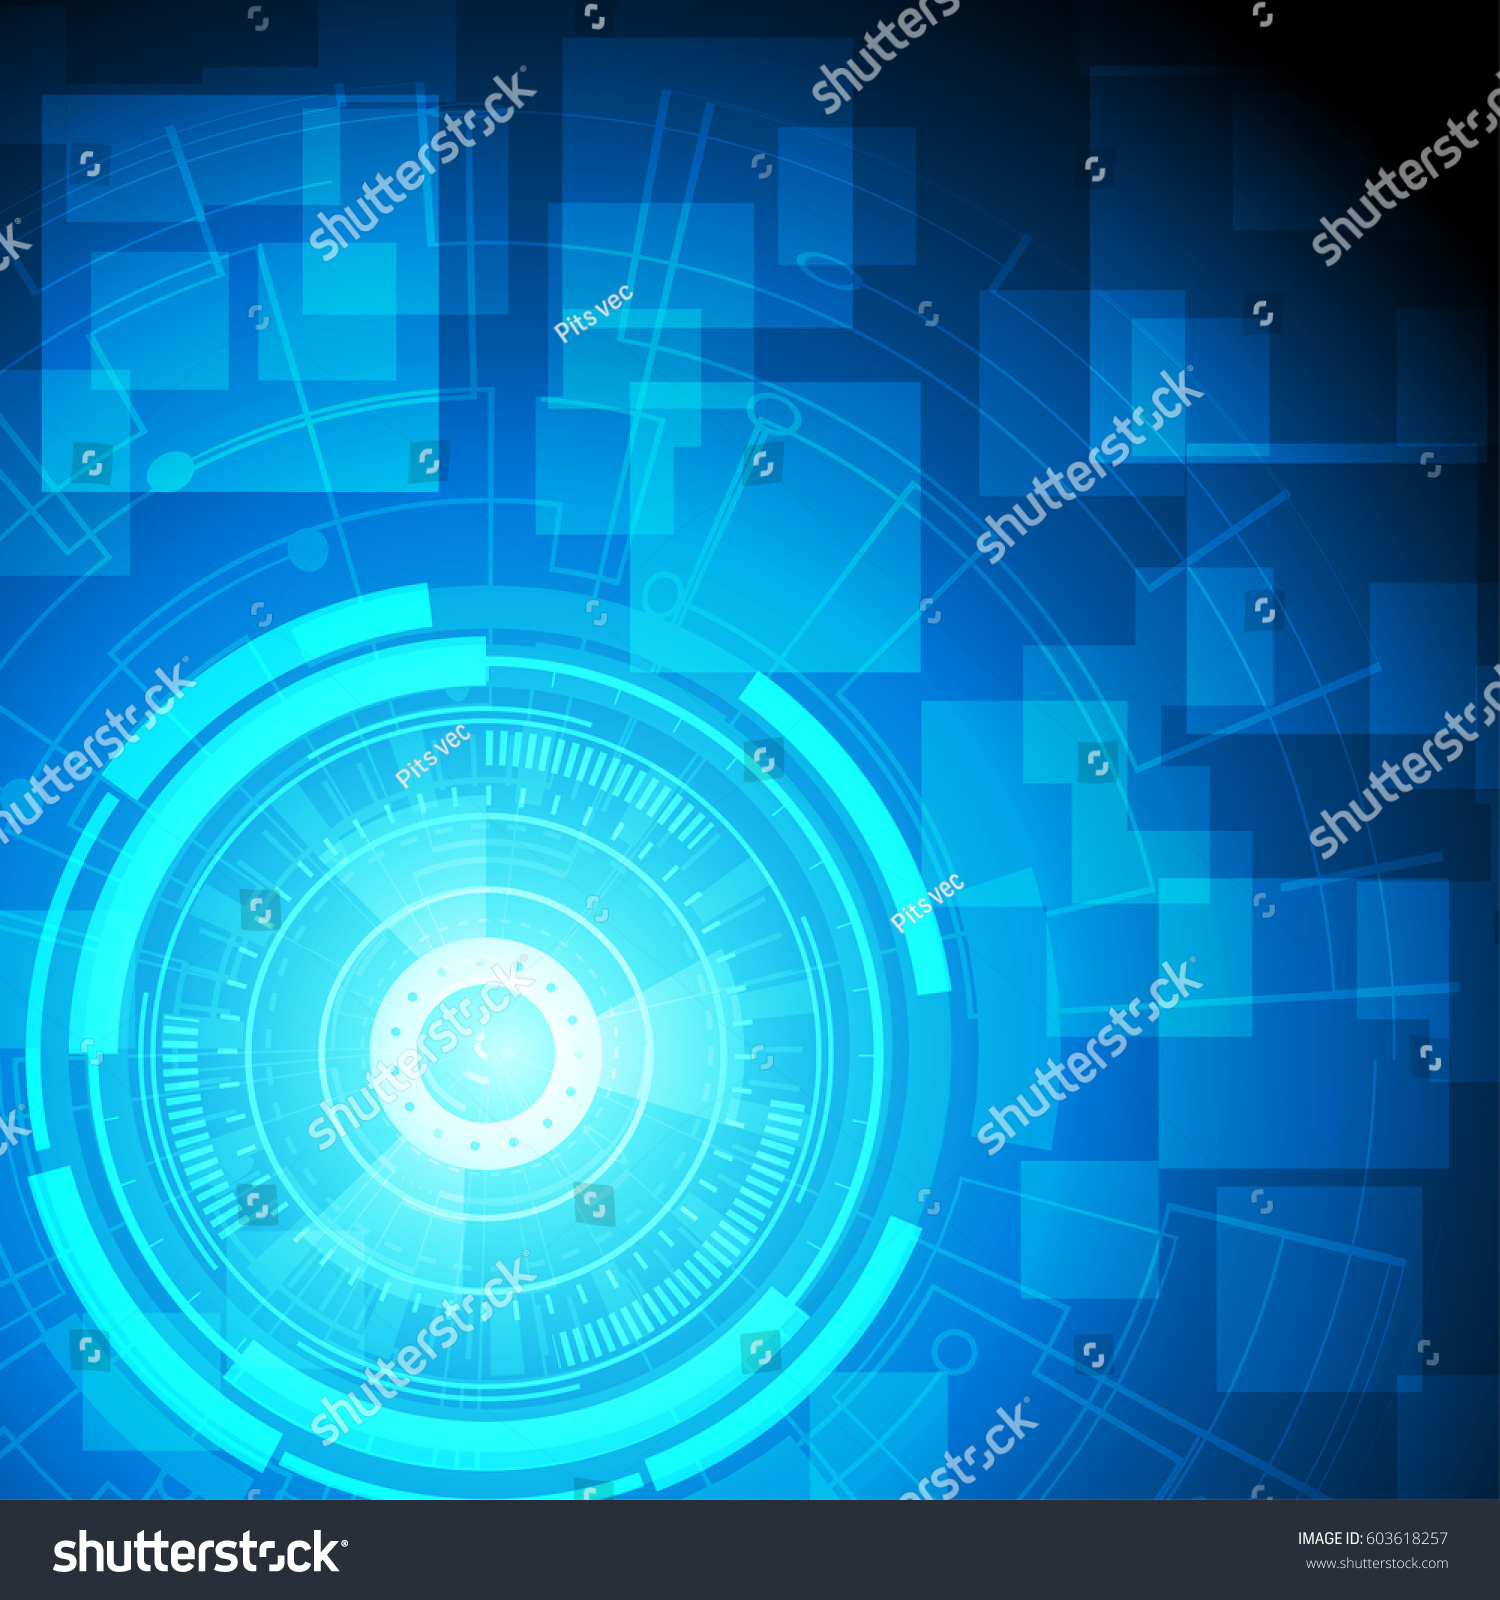 Vector Futuristic Technology Background 500x500 Pixels Stock Vector Royalty Free